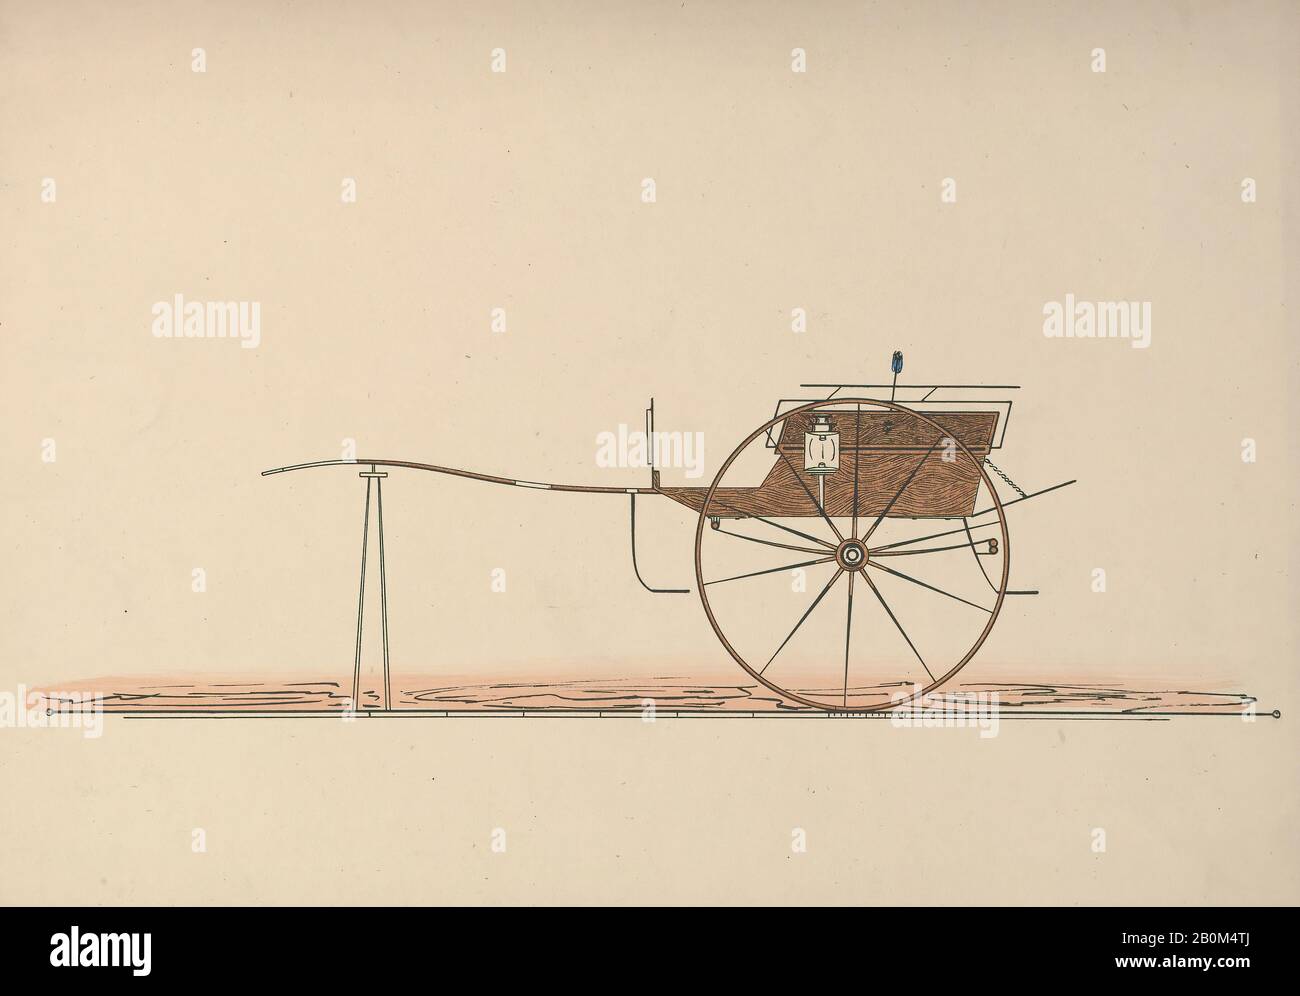 Design for Village Cart, 1850–74, Colored engraving from periodical, sheet: 6 3/8 x 9 1/4 in. (16.2 x 23.5 cm), Prints Stock Photo